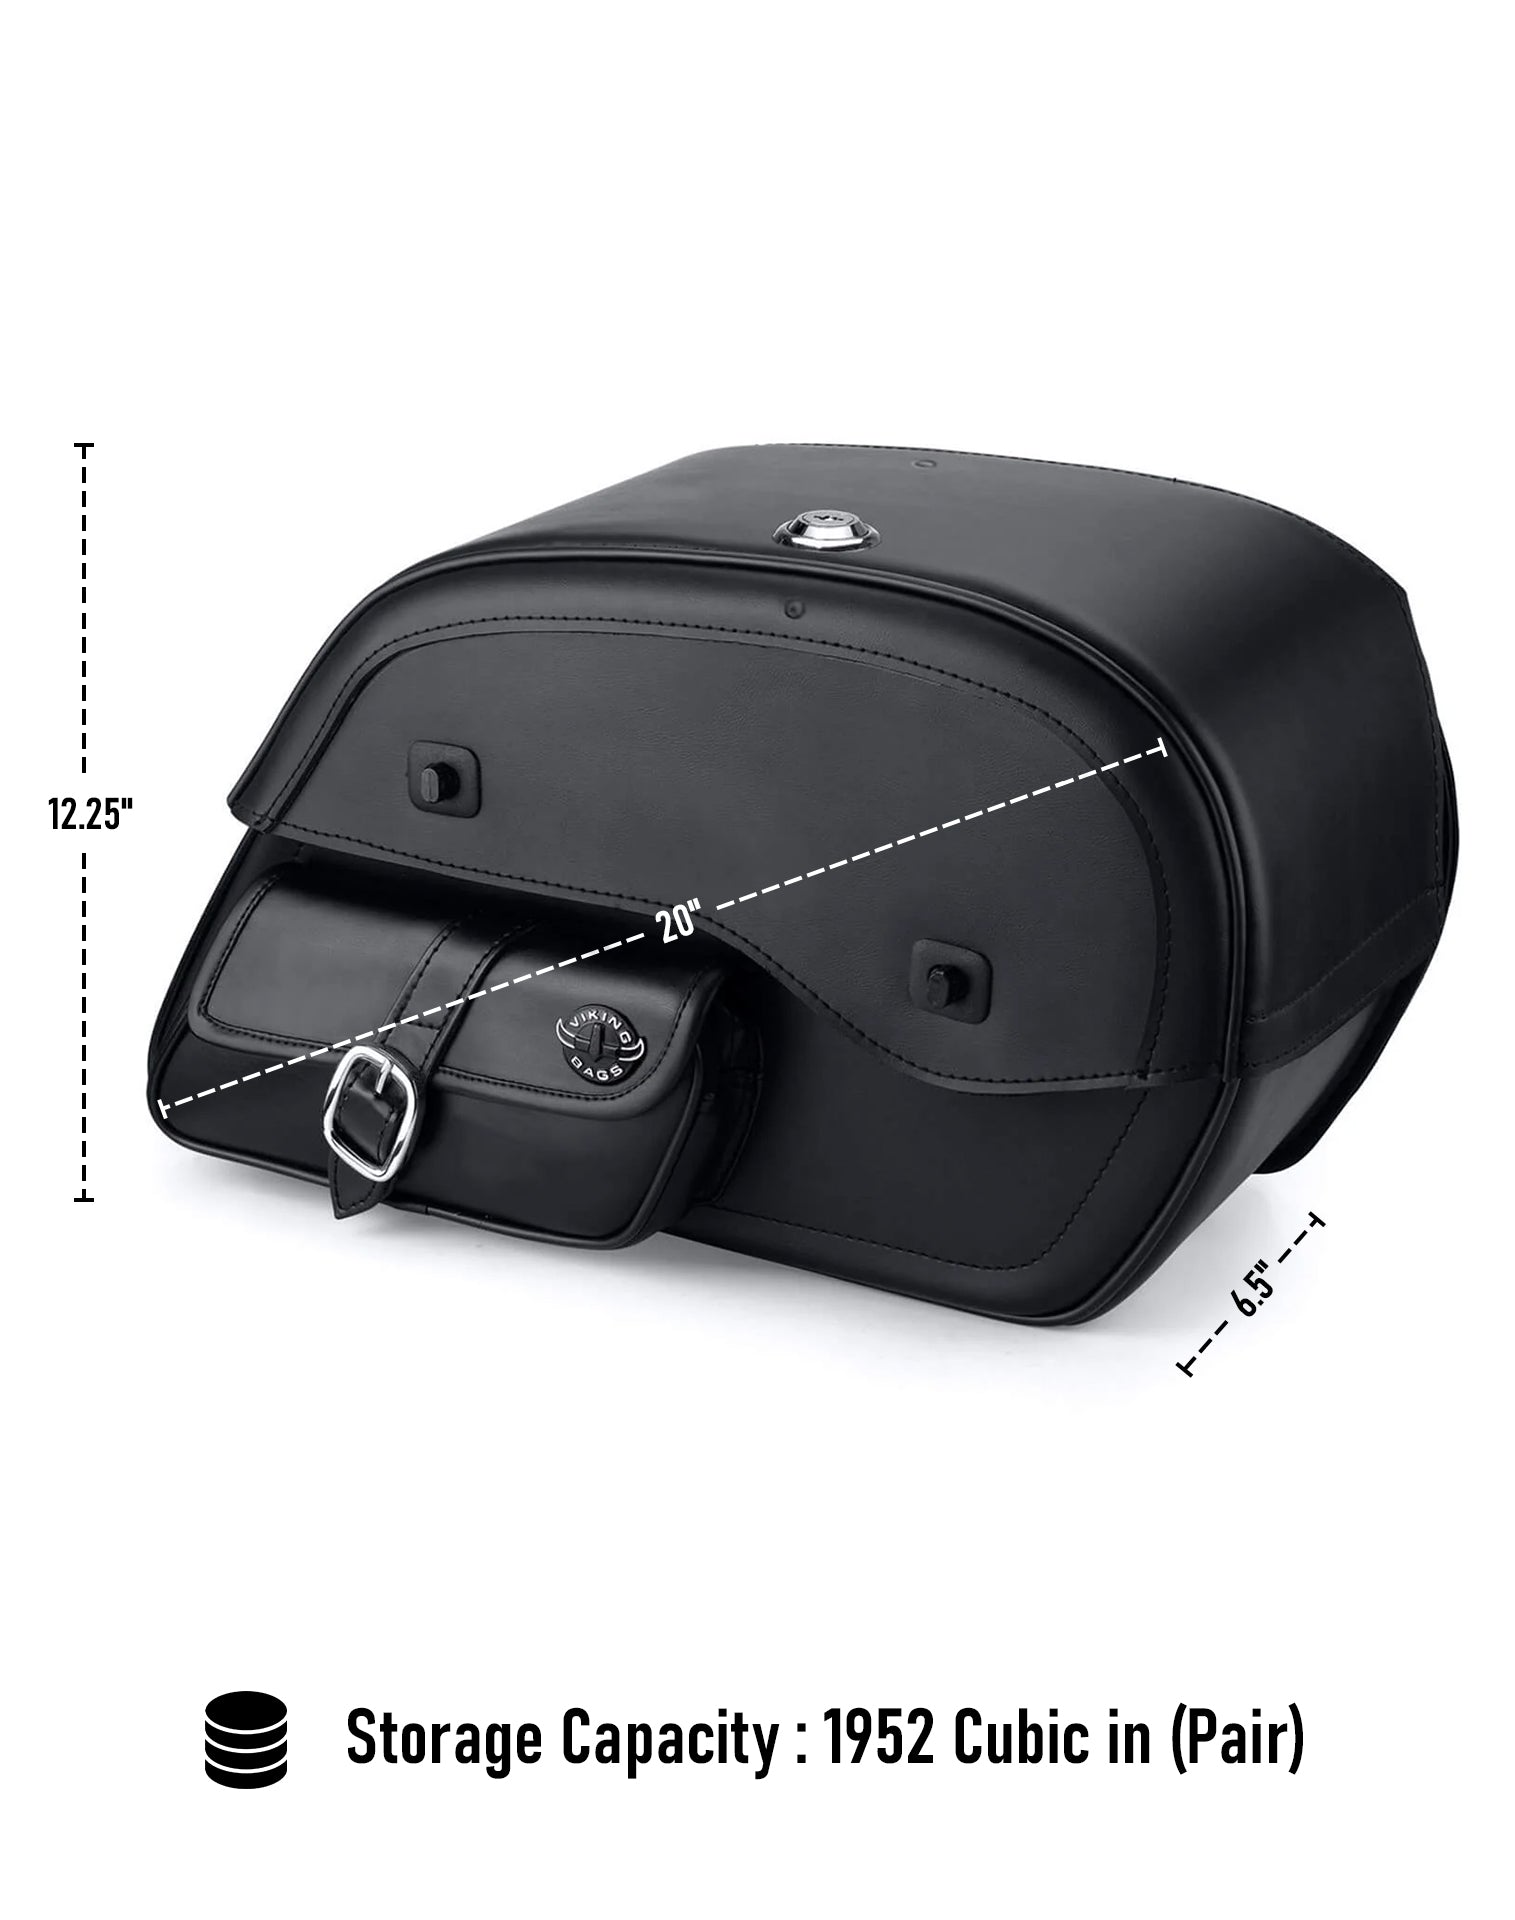 Viking Essential Side Pocket Large Kawasaki Vulcan 2000 Vn2000 Leather Motorcycle Saddlebags Can Store Your Ridings Gears